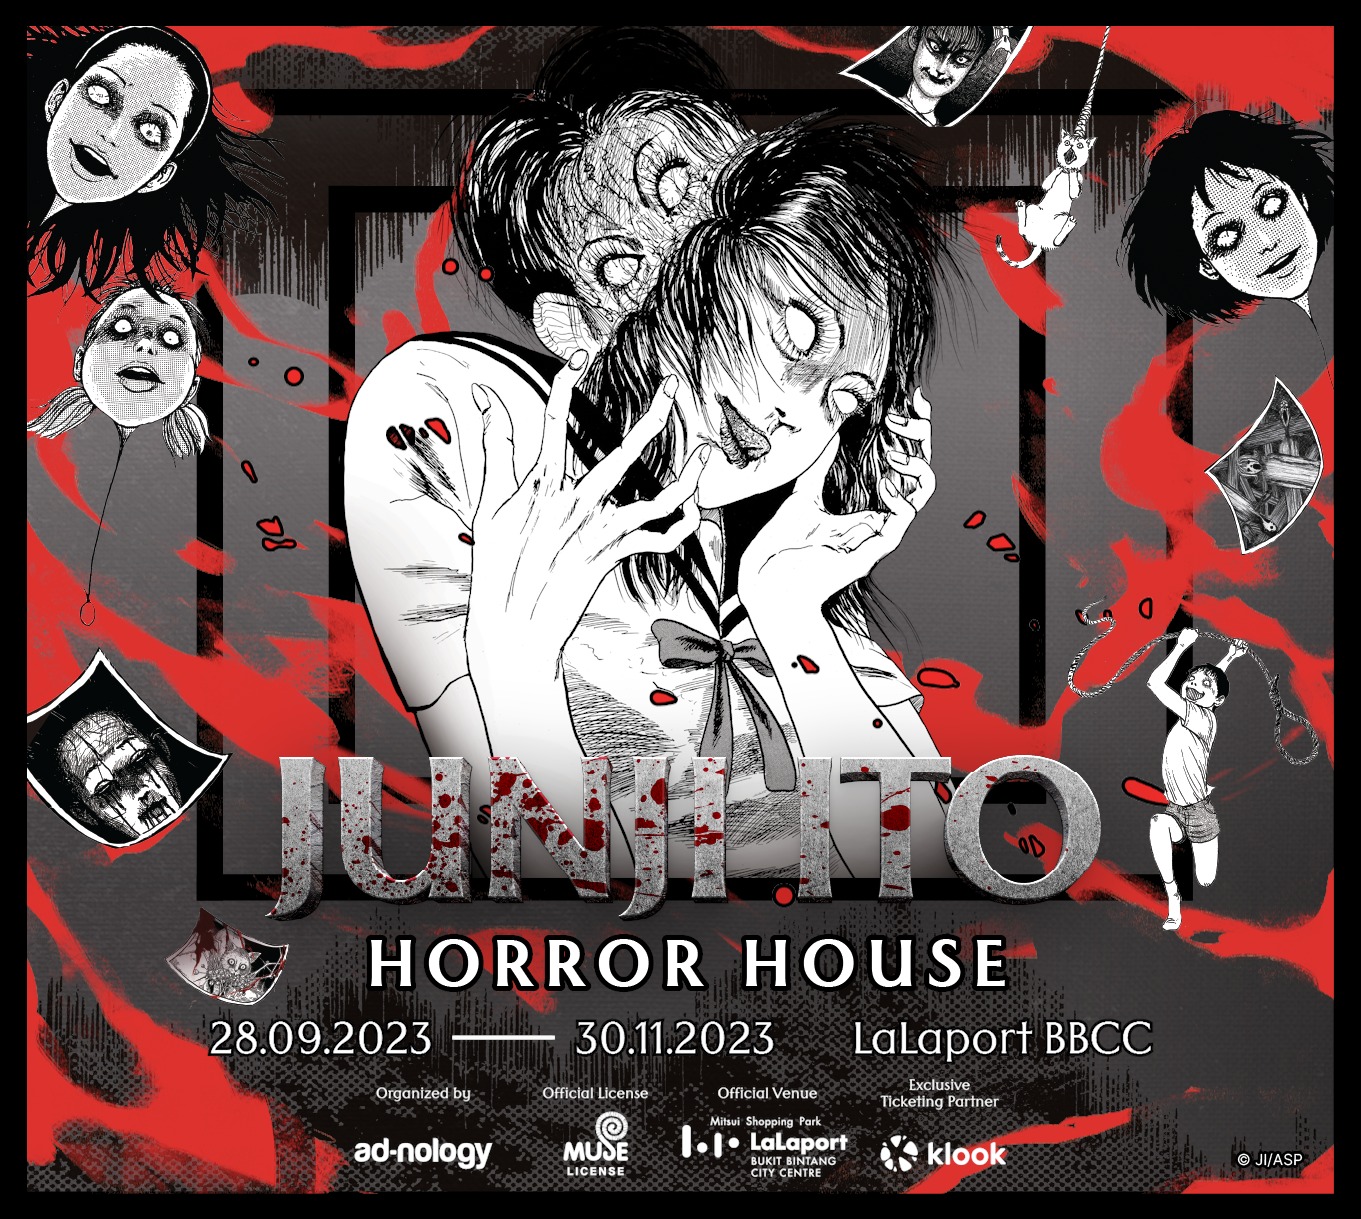 Junji Ito Horror House - Promotional poster